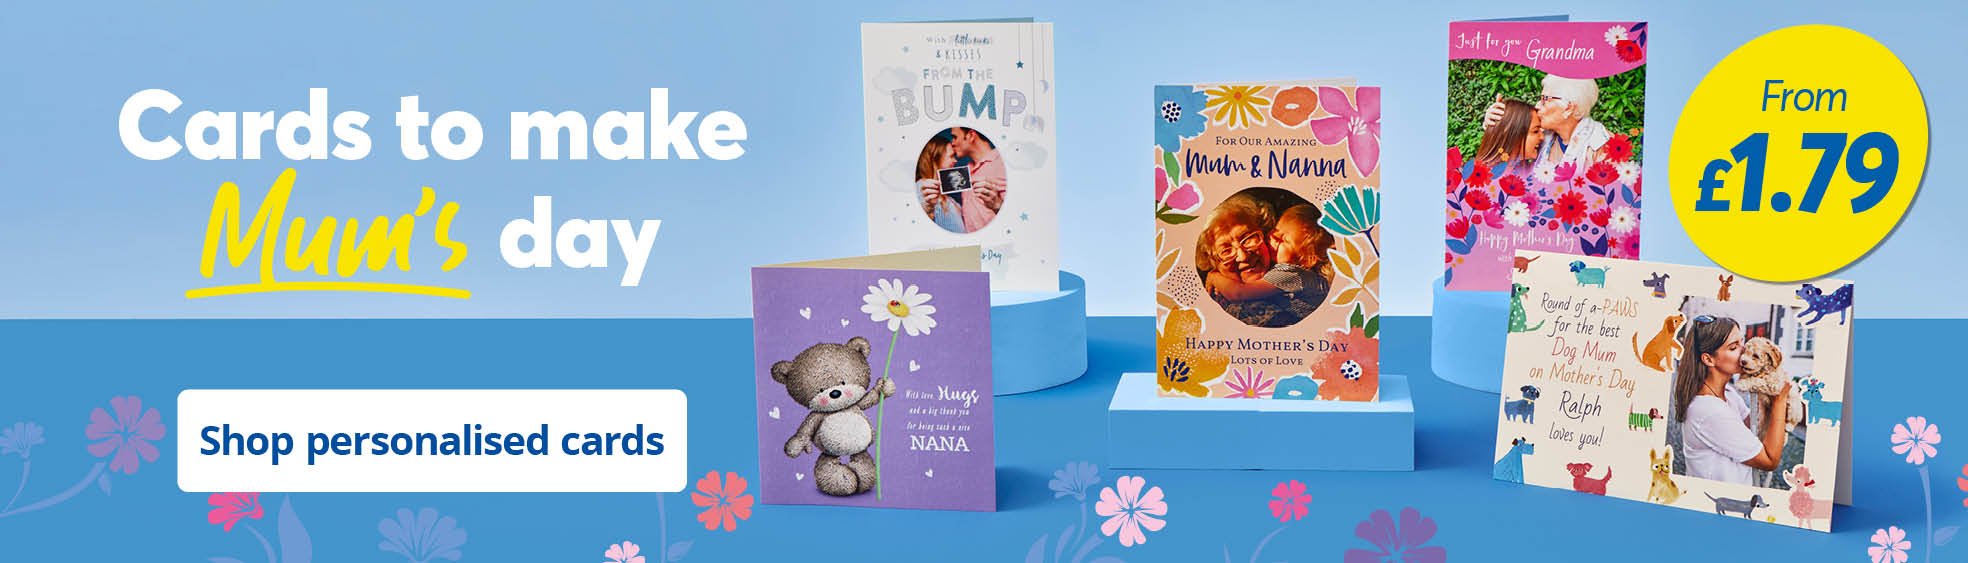 Personalised Mother's Day cards from £1.79